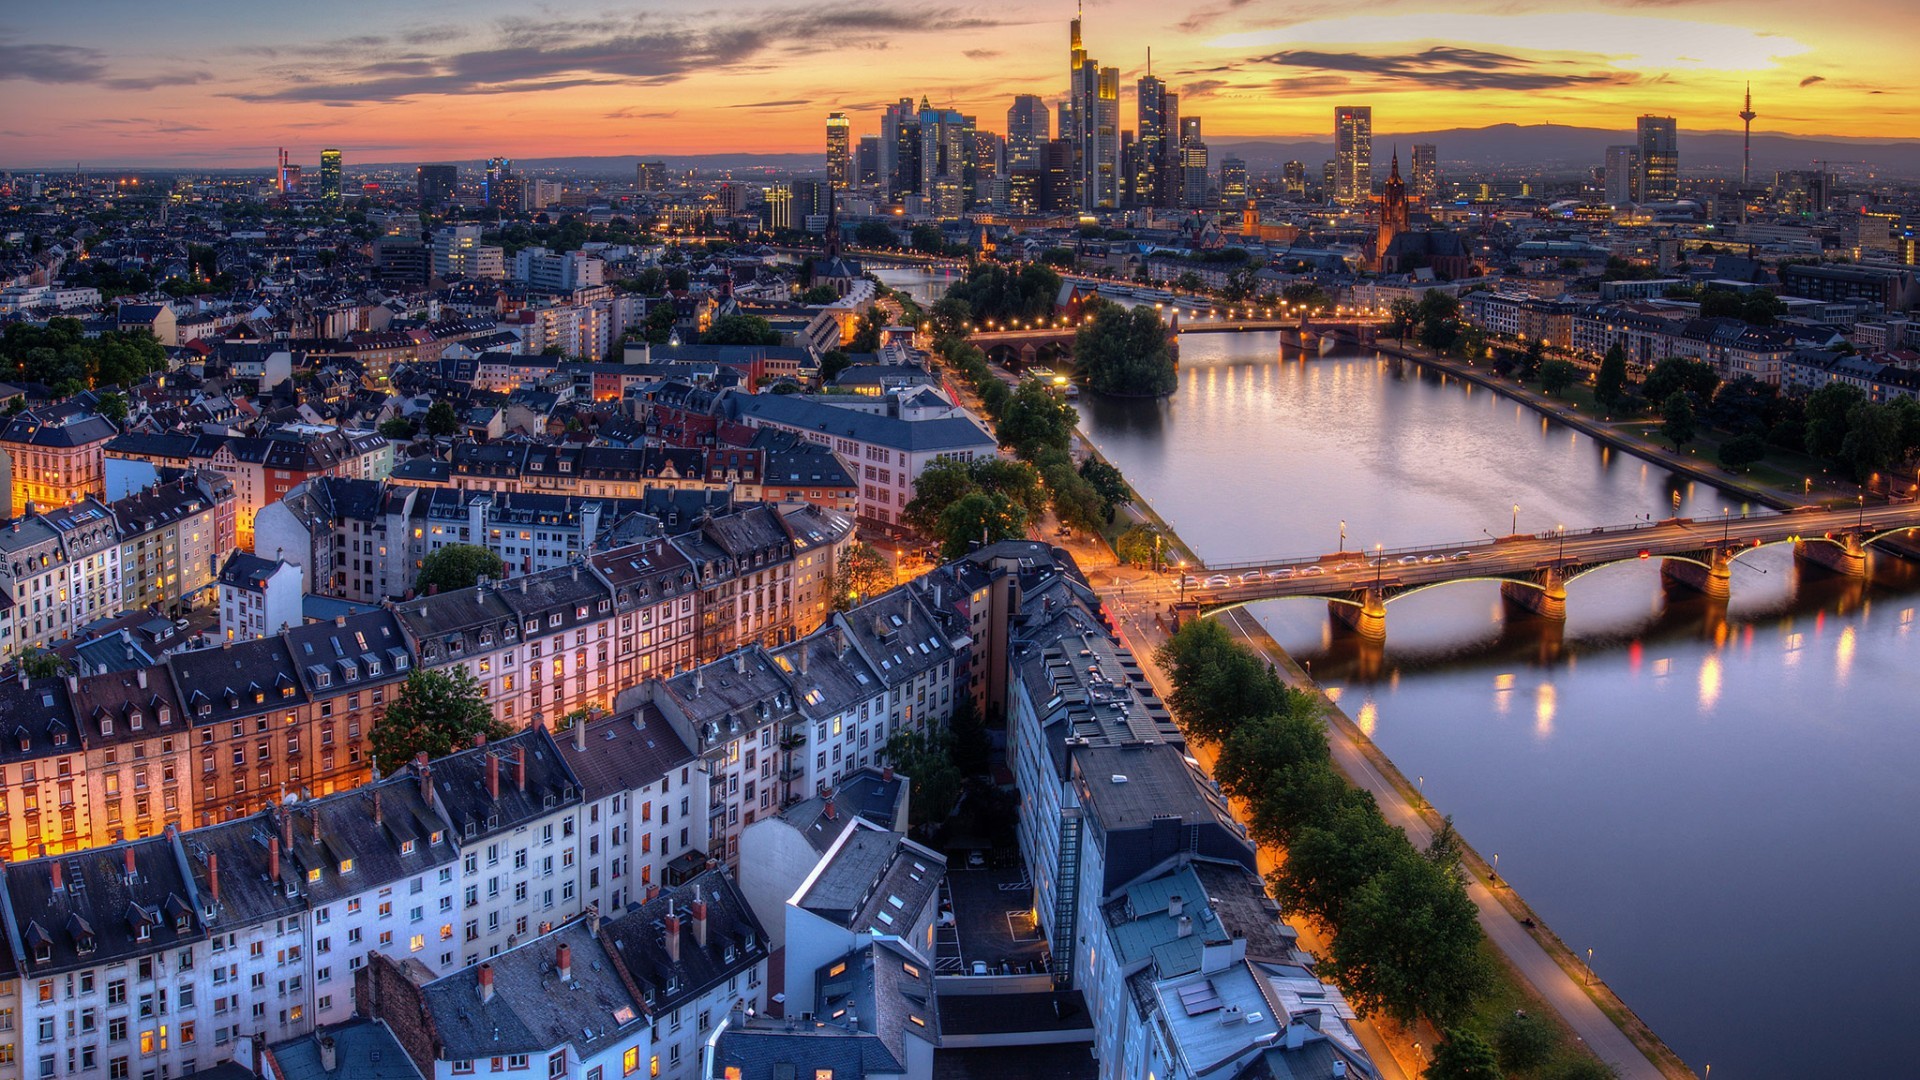 General 1920x1080 city cityscape architecture lights building bridge water river trees Frankfurt Germany house skyscraper evening clouds sunset street rooftops aerial view hills reflection